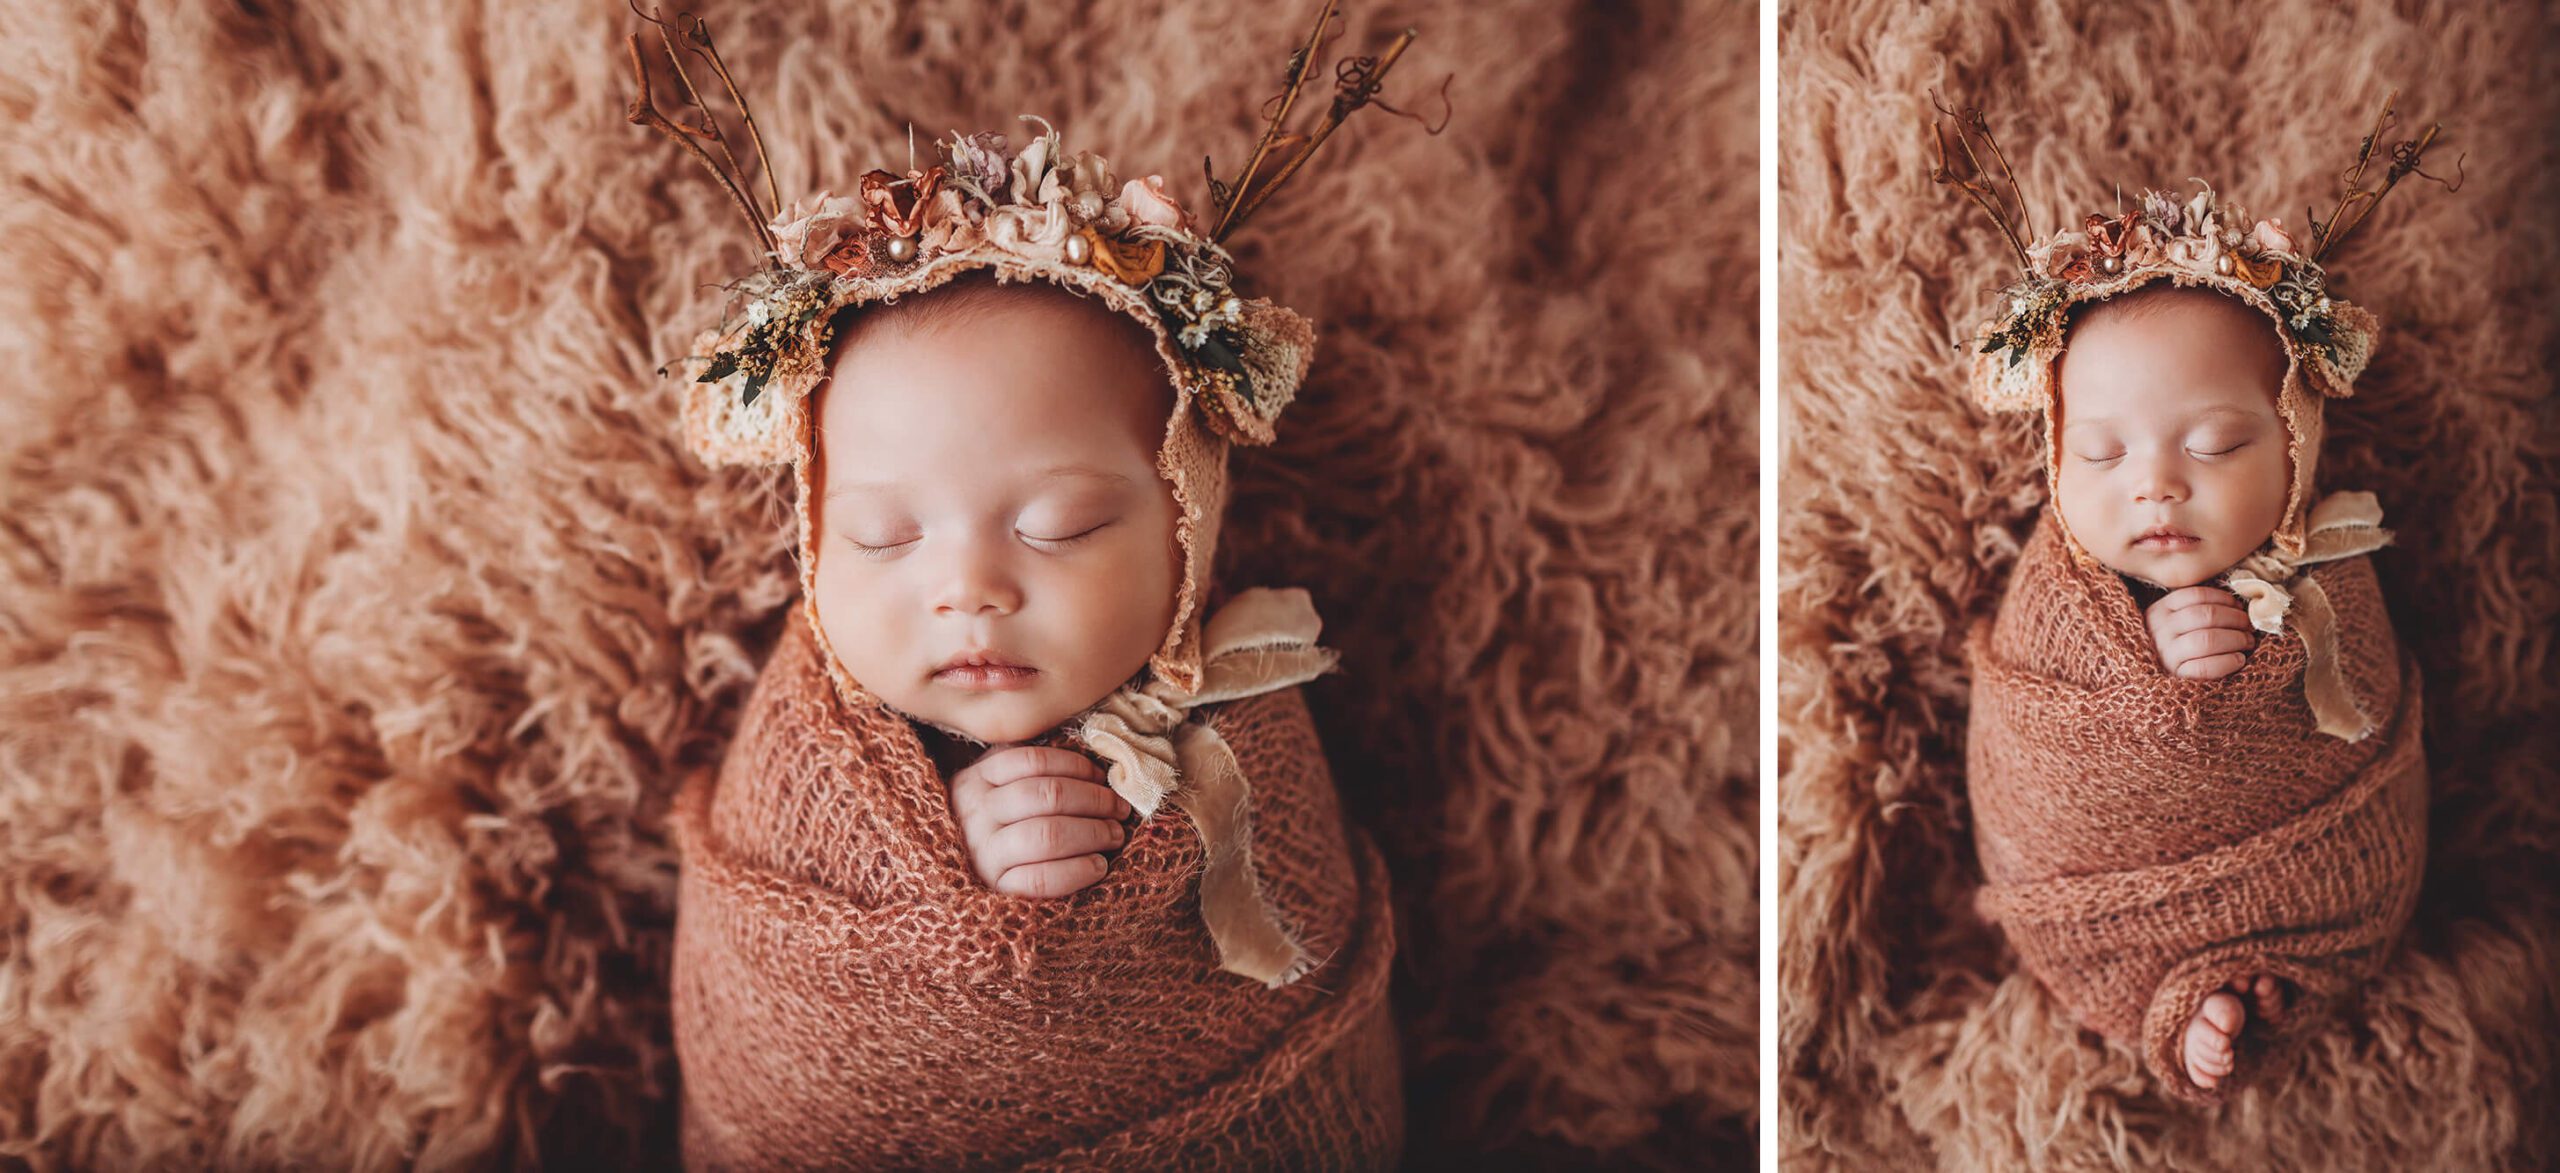 Tiny deer bonnet and beautiful peach colors for this beautiful little girl